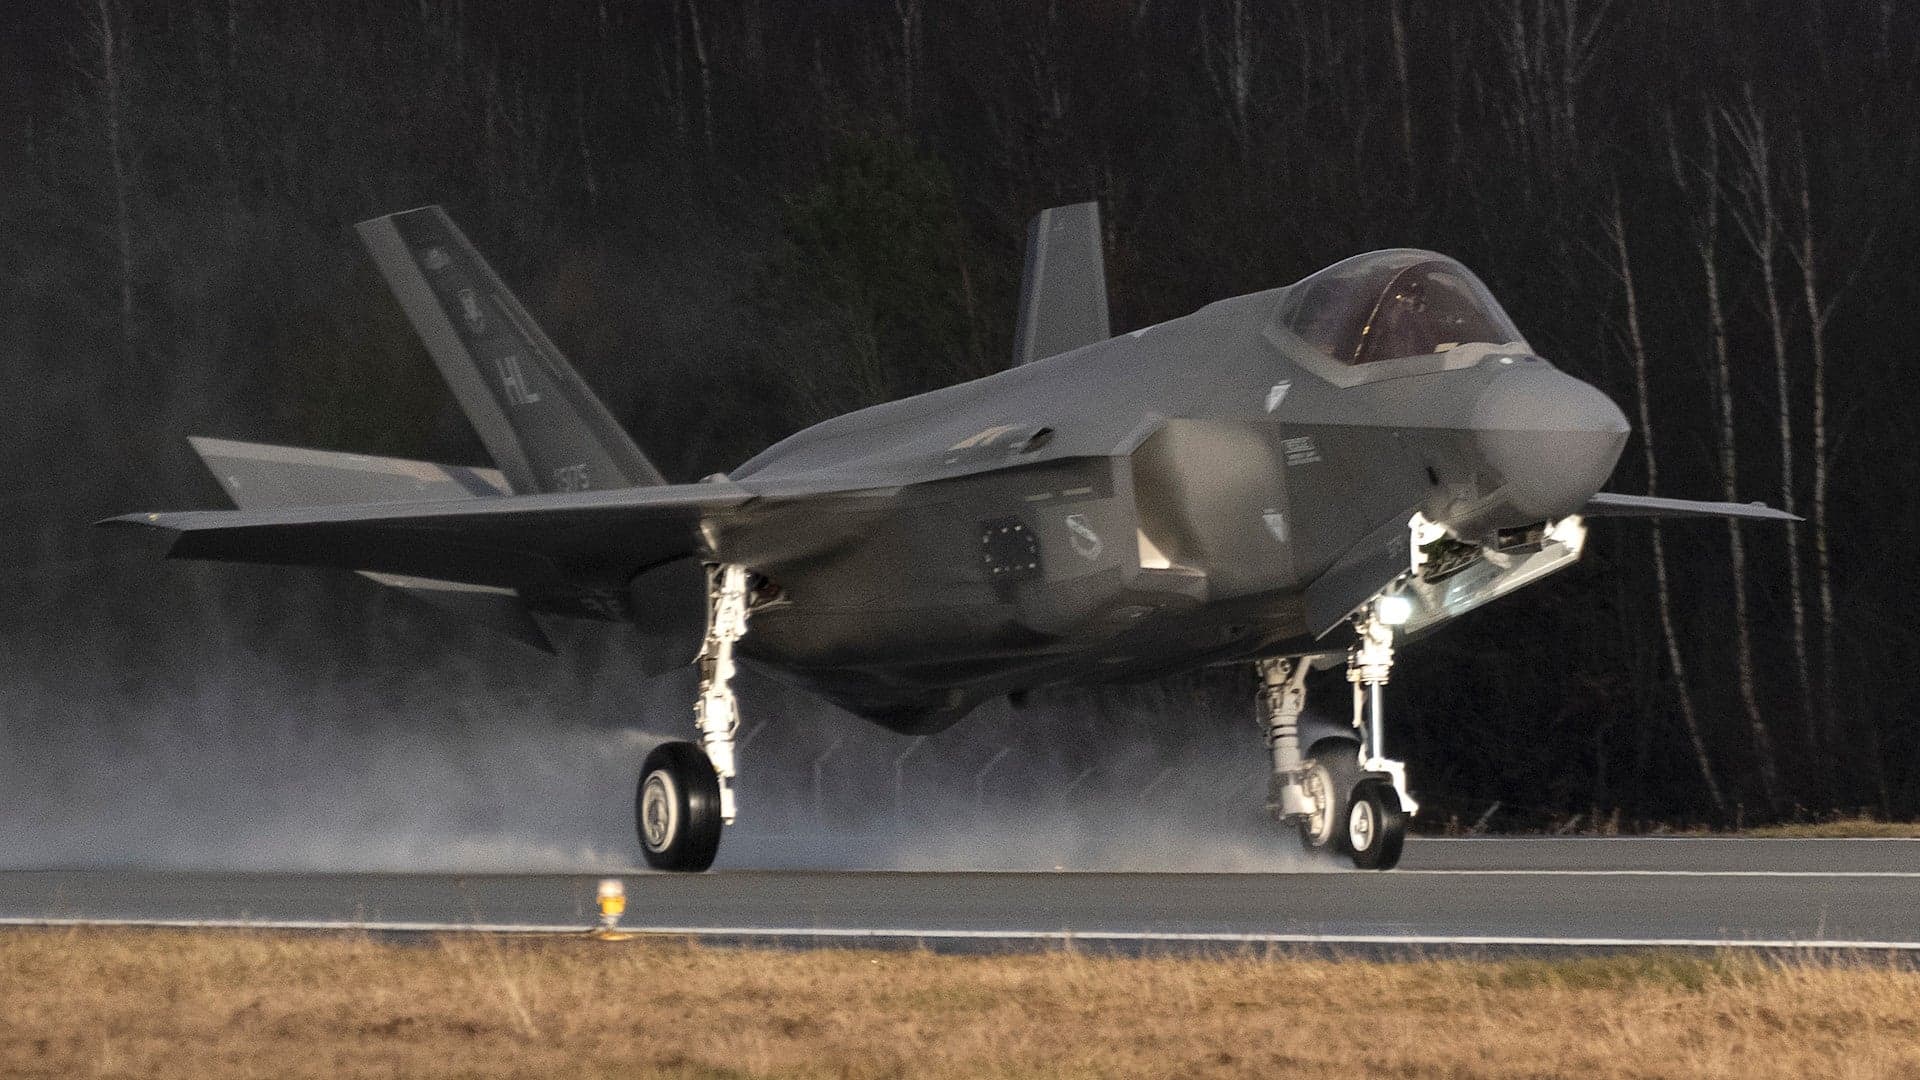 NATO’s Eastern Flank To Be Fortified By U.S. F-35s, AH-64s, Troops